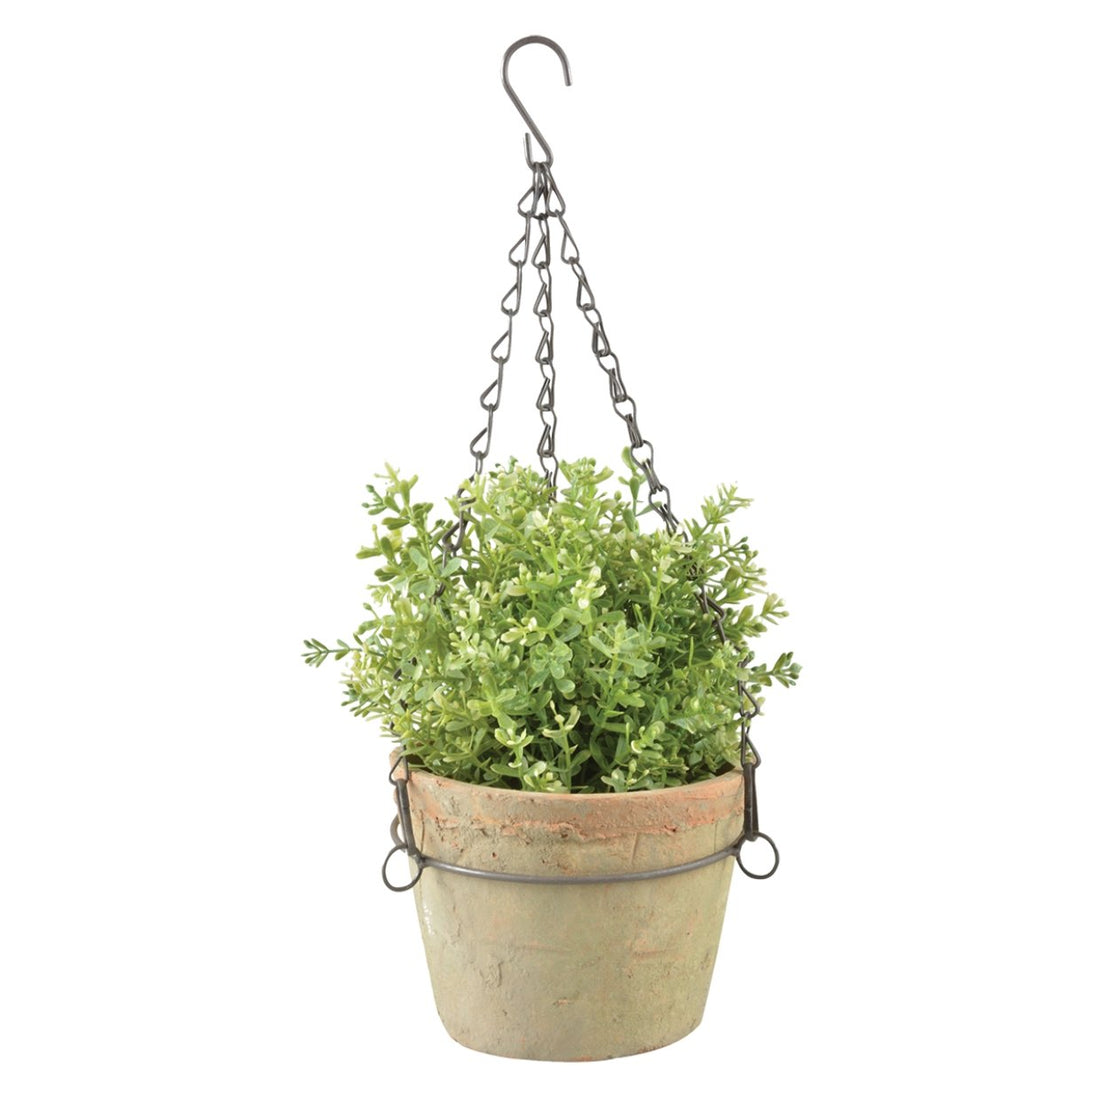 Terracotta Hanging Planter - The Flower Crate